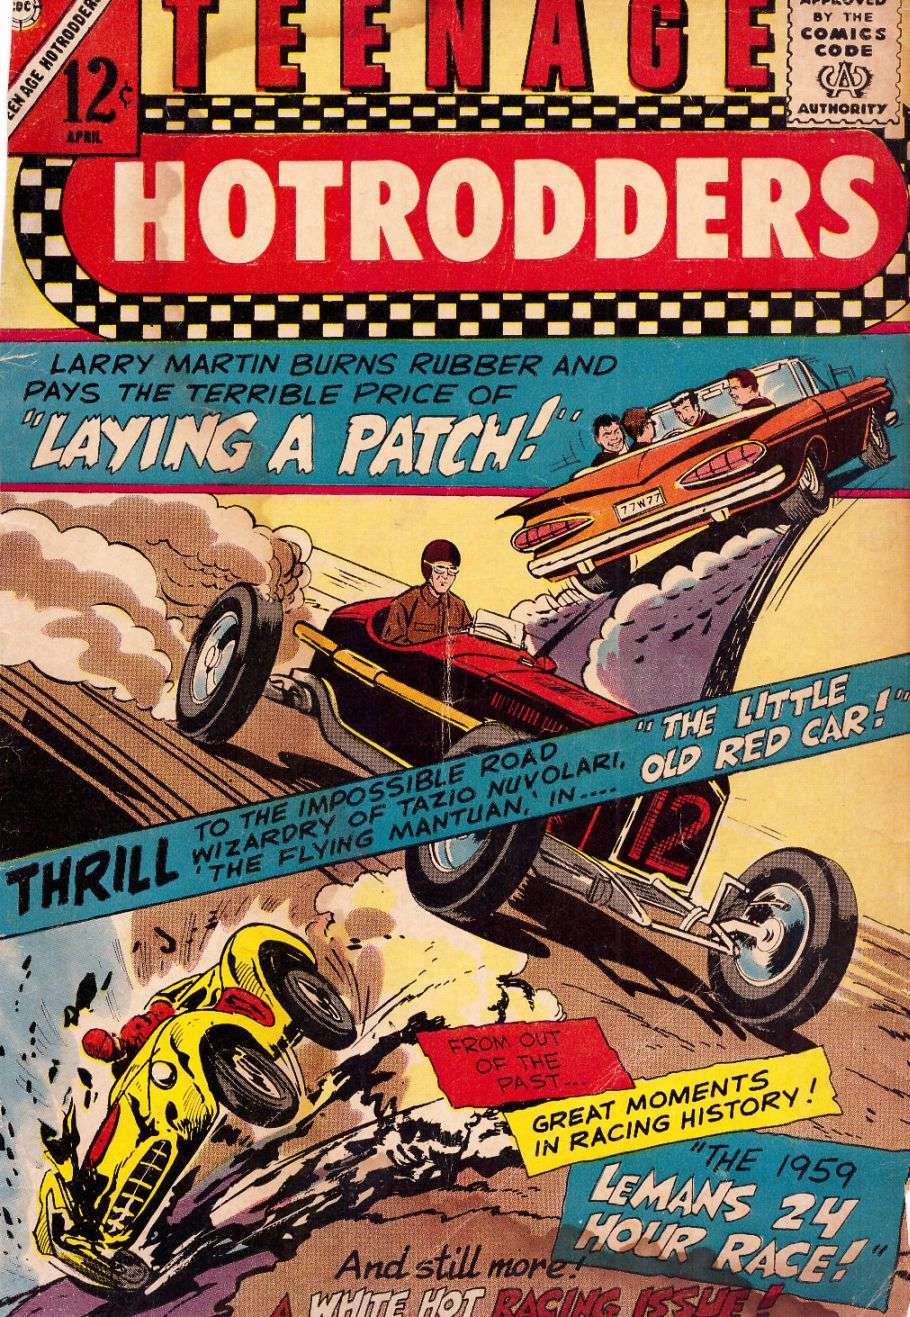 Comic Book Cover For Teenage Hotrodders 17